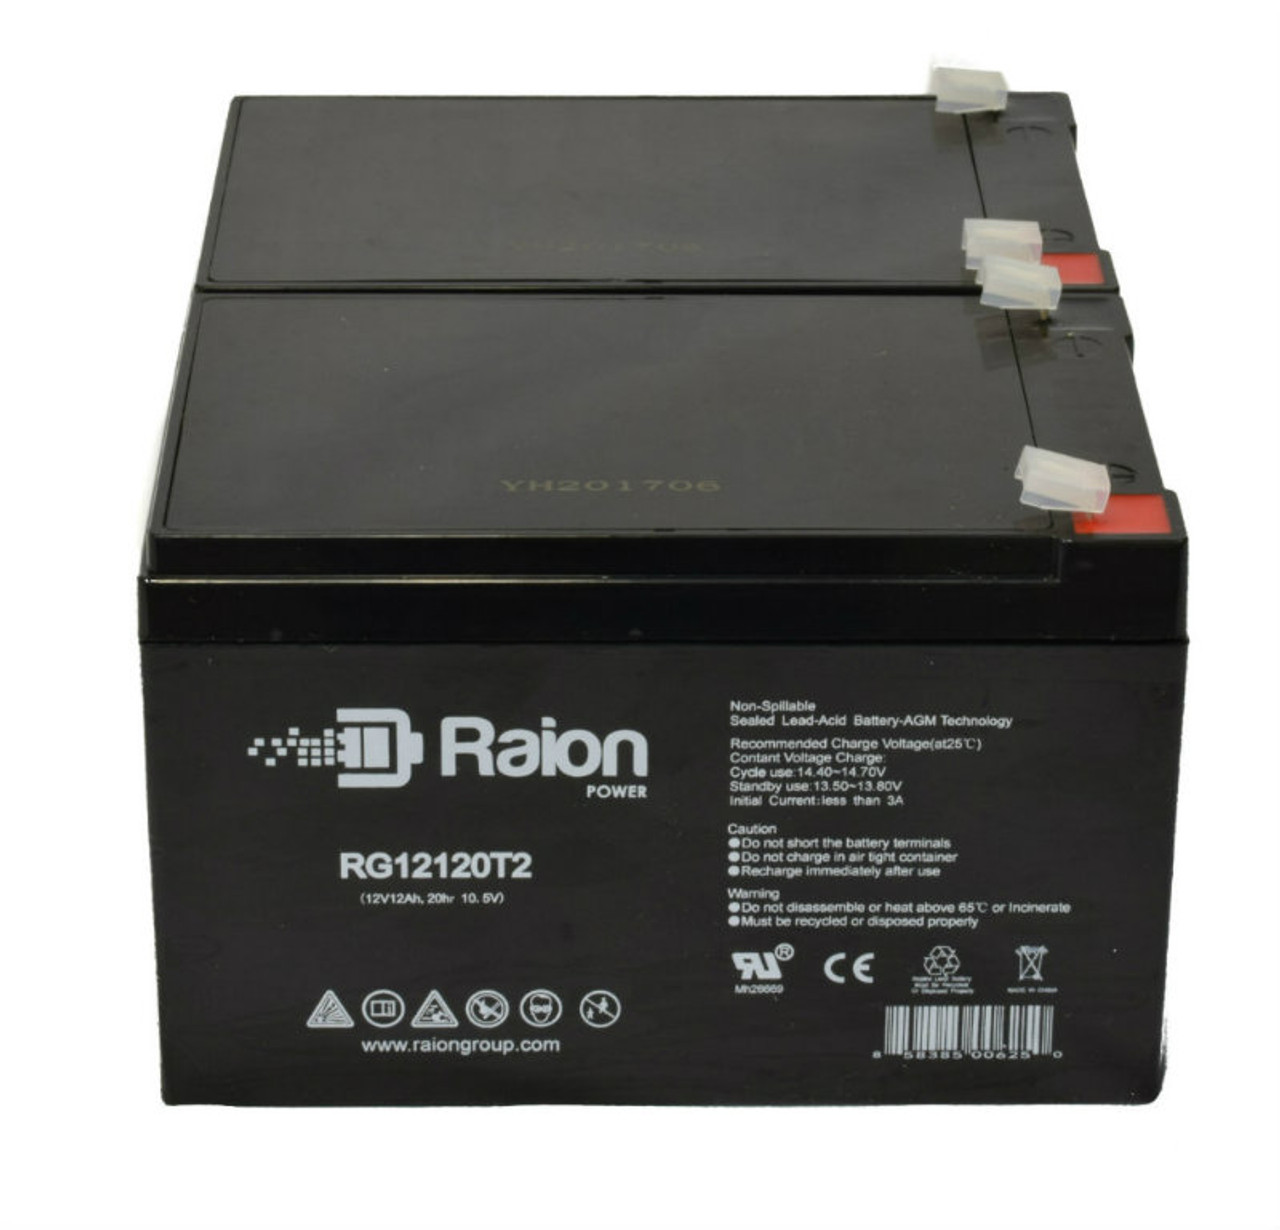 Raion Power 12V 12Ah Non-Spillable Compatible Replacement Battery for KAGE MF12V10Ah - (2 Pack)